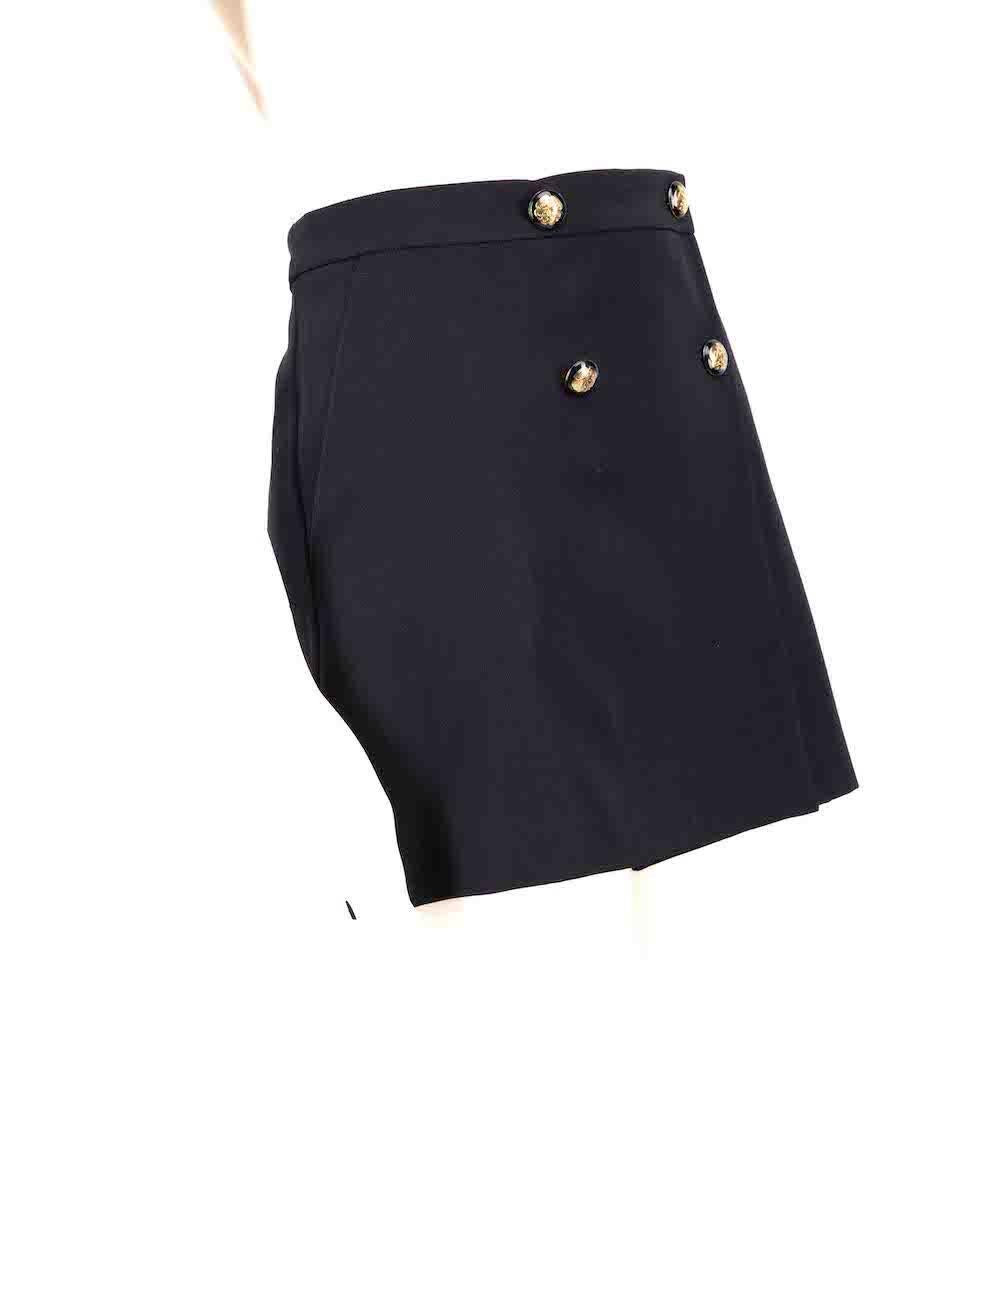 CONDITION is New with tags on this brand new Alexander McQueendesigner item. This item comes with original packaging.
 
 
 
 Details
 
 
 Model: 752499QJACF 4100
 
 Season: FW23
 
 Navy
 
 Wool
 
 Wrap skirt
 
 Mini
 
 Seal buttons
 
 Button up